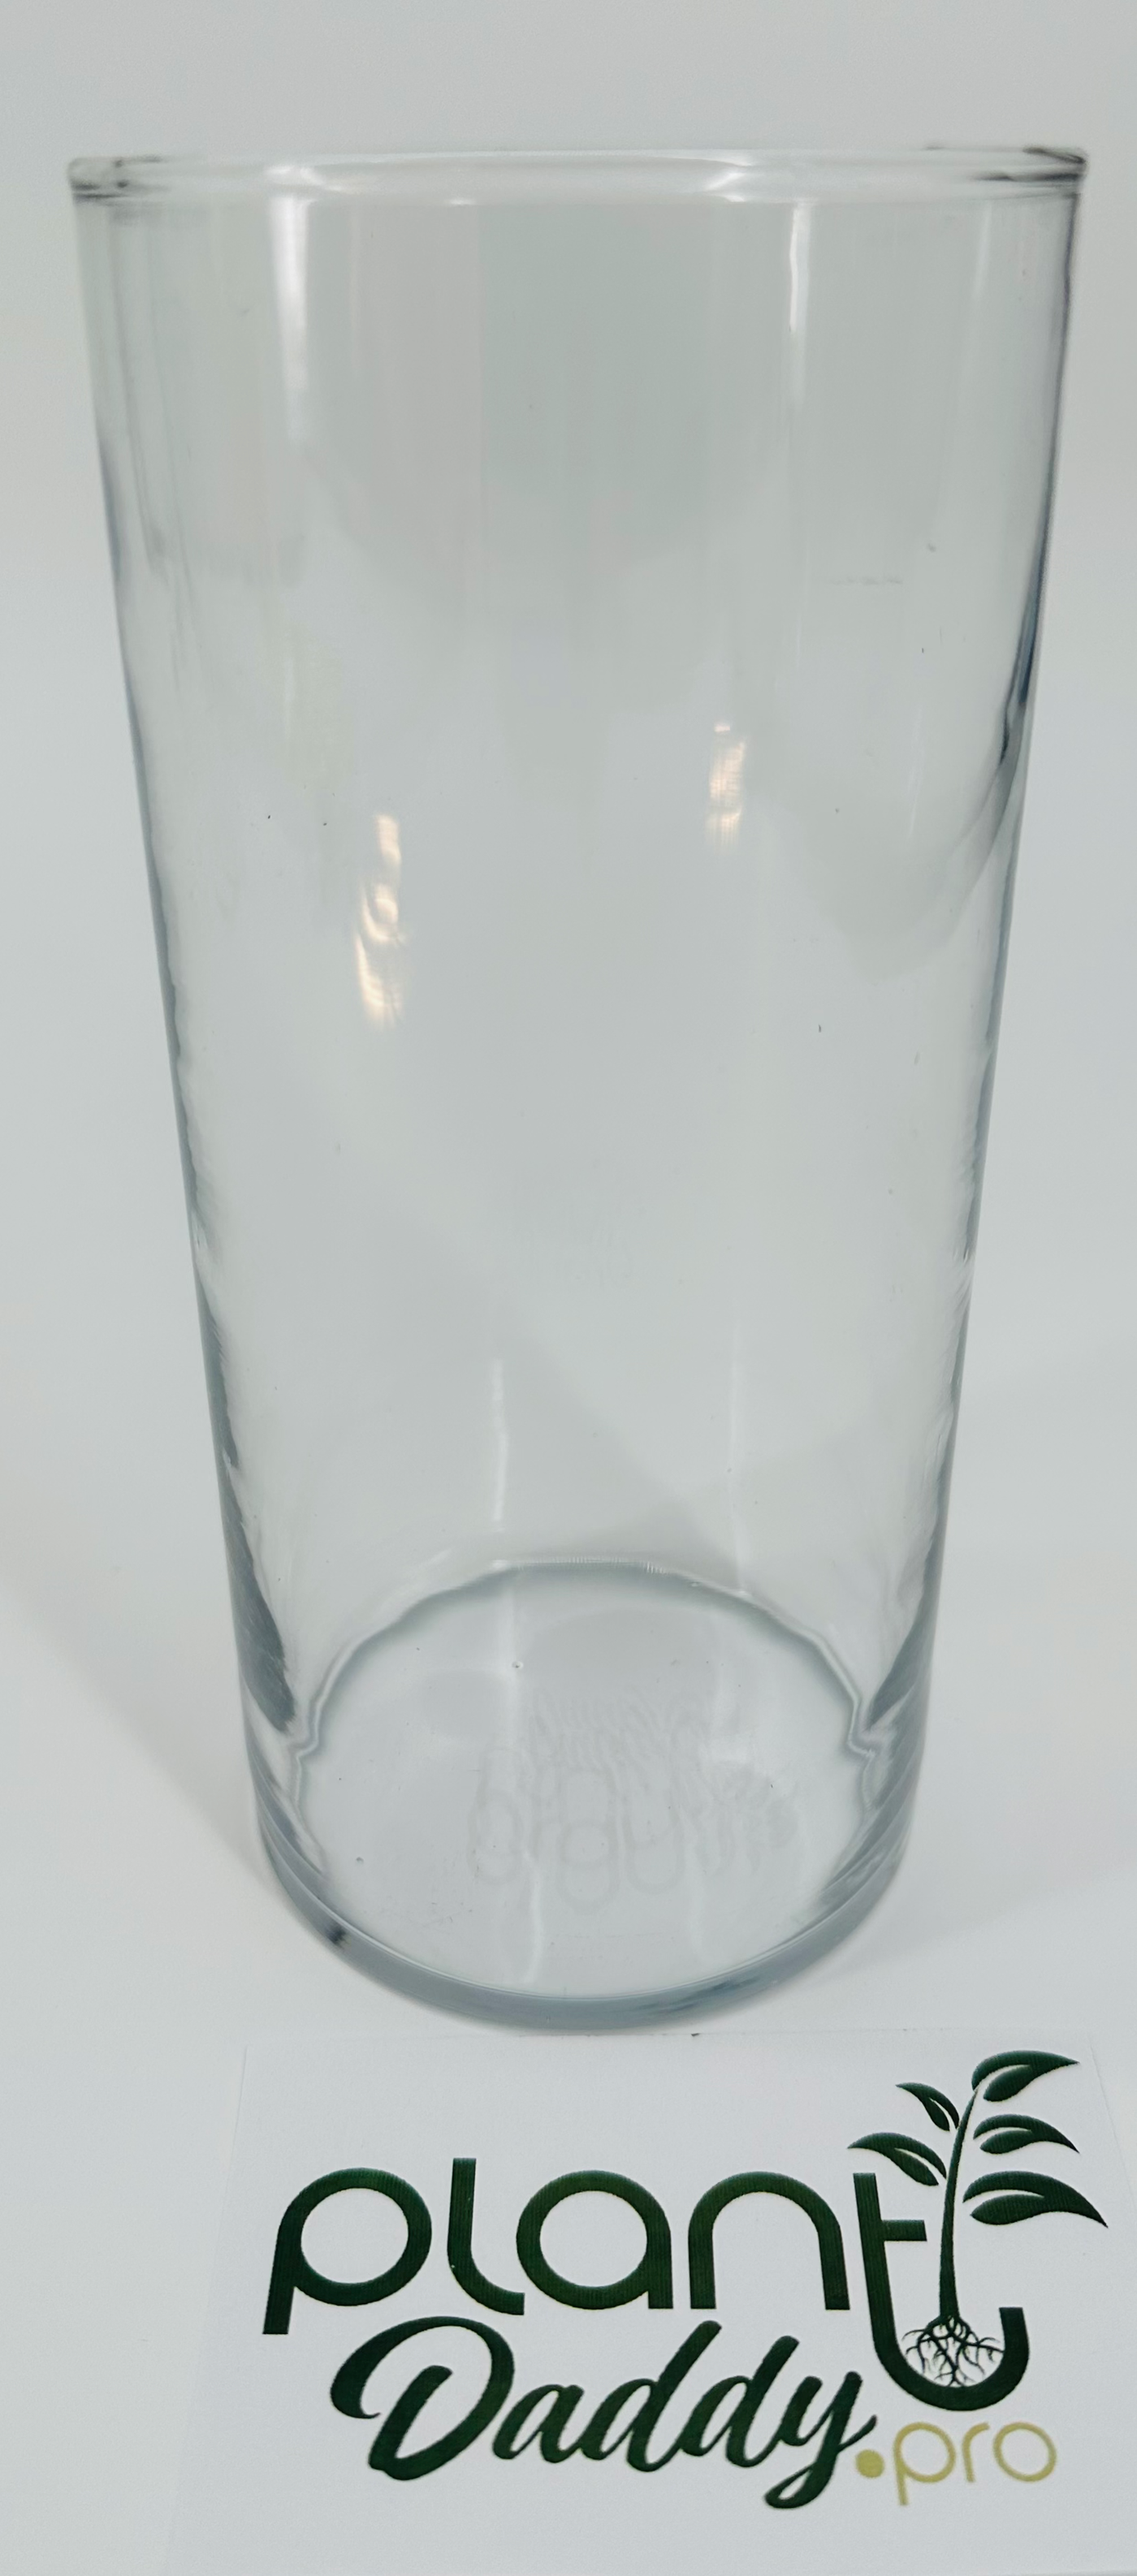 Plant Daddy 8in tall by 3.5in diameter glass cylinder (great for starting Hydros)